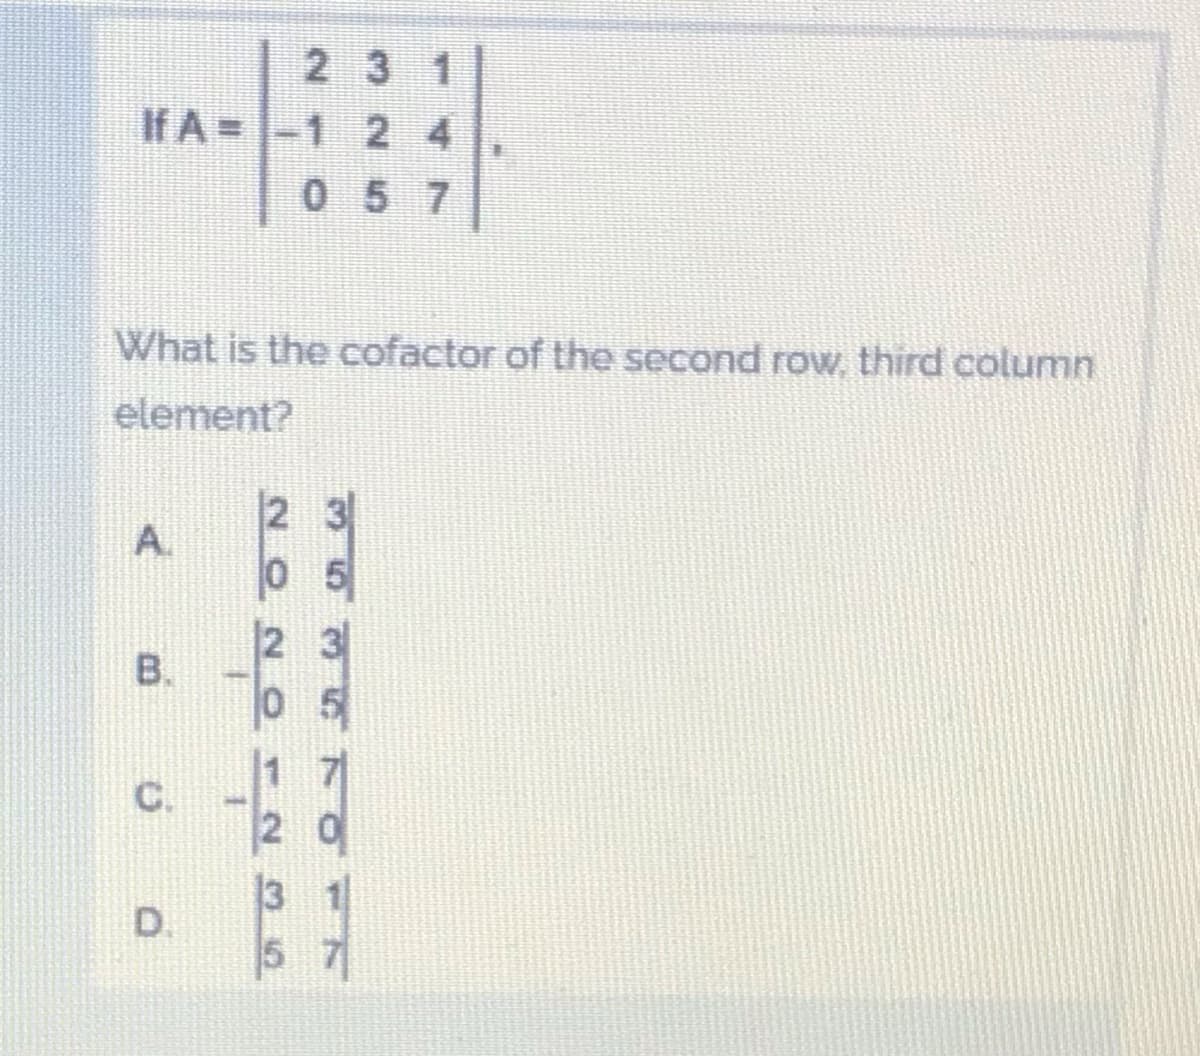 2 3 1
If A =
-1 2 4
057
What is the cofactor of the second row, third column
element?
2 3
A.
0 5
B.
C.
2 0
D.
5 7
